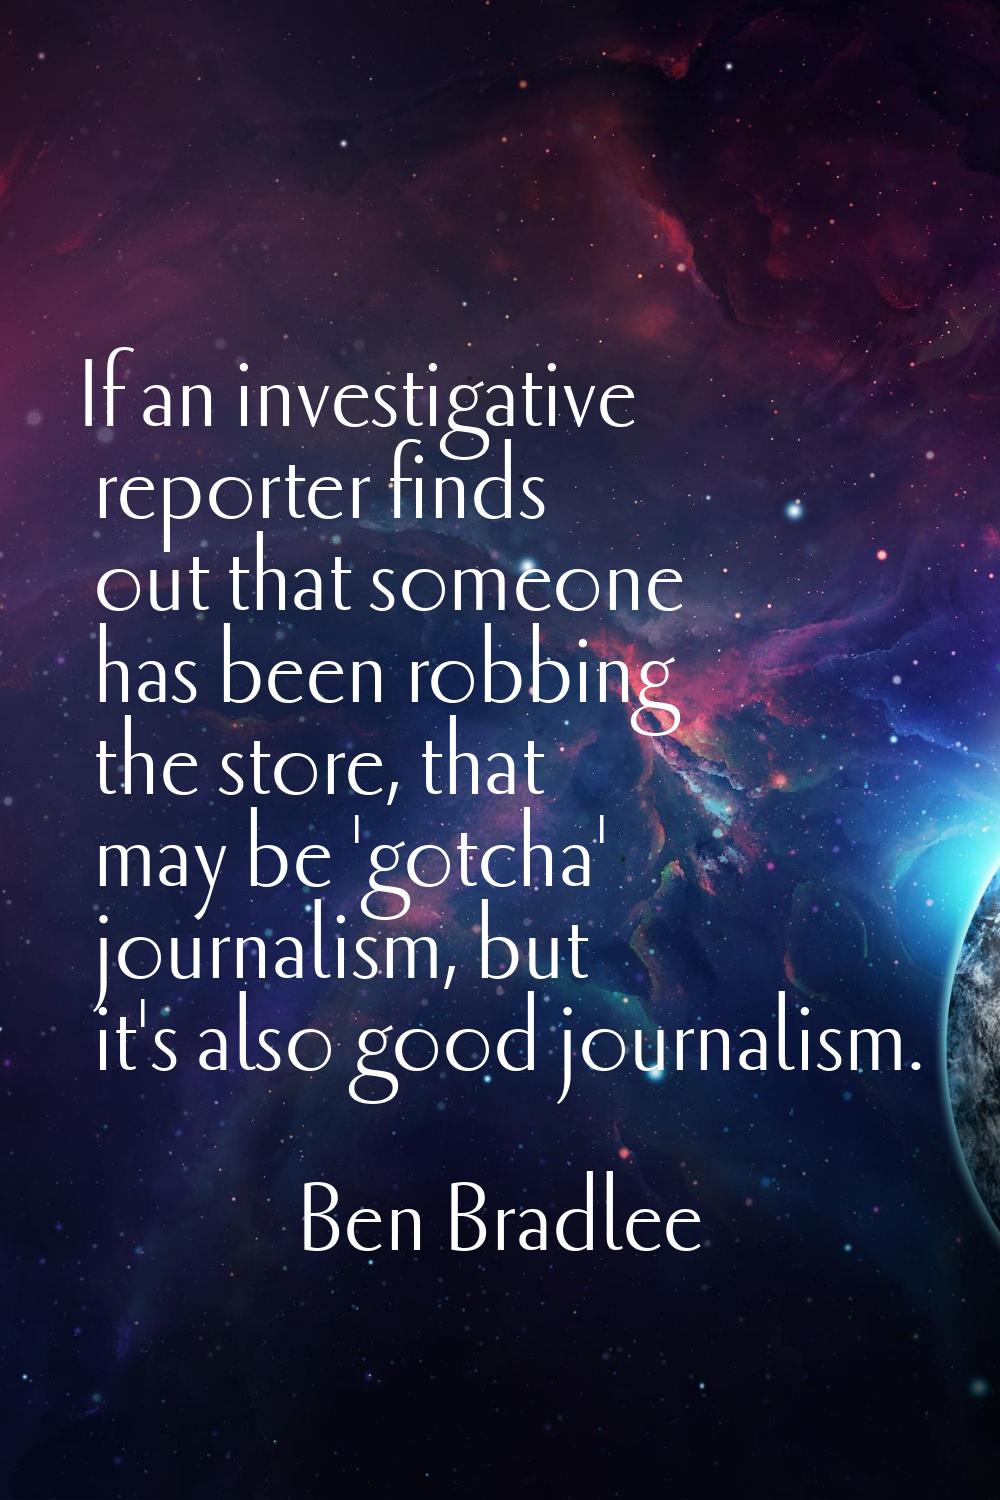 If an investigative reporter finds out that someone has been robbing the store, that may be 'gotcha